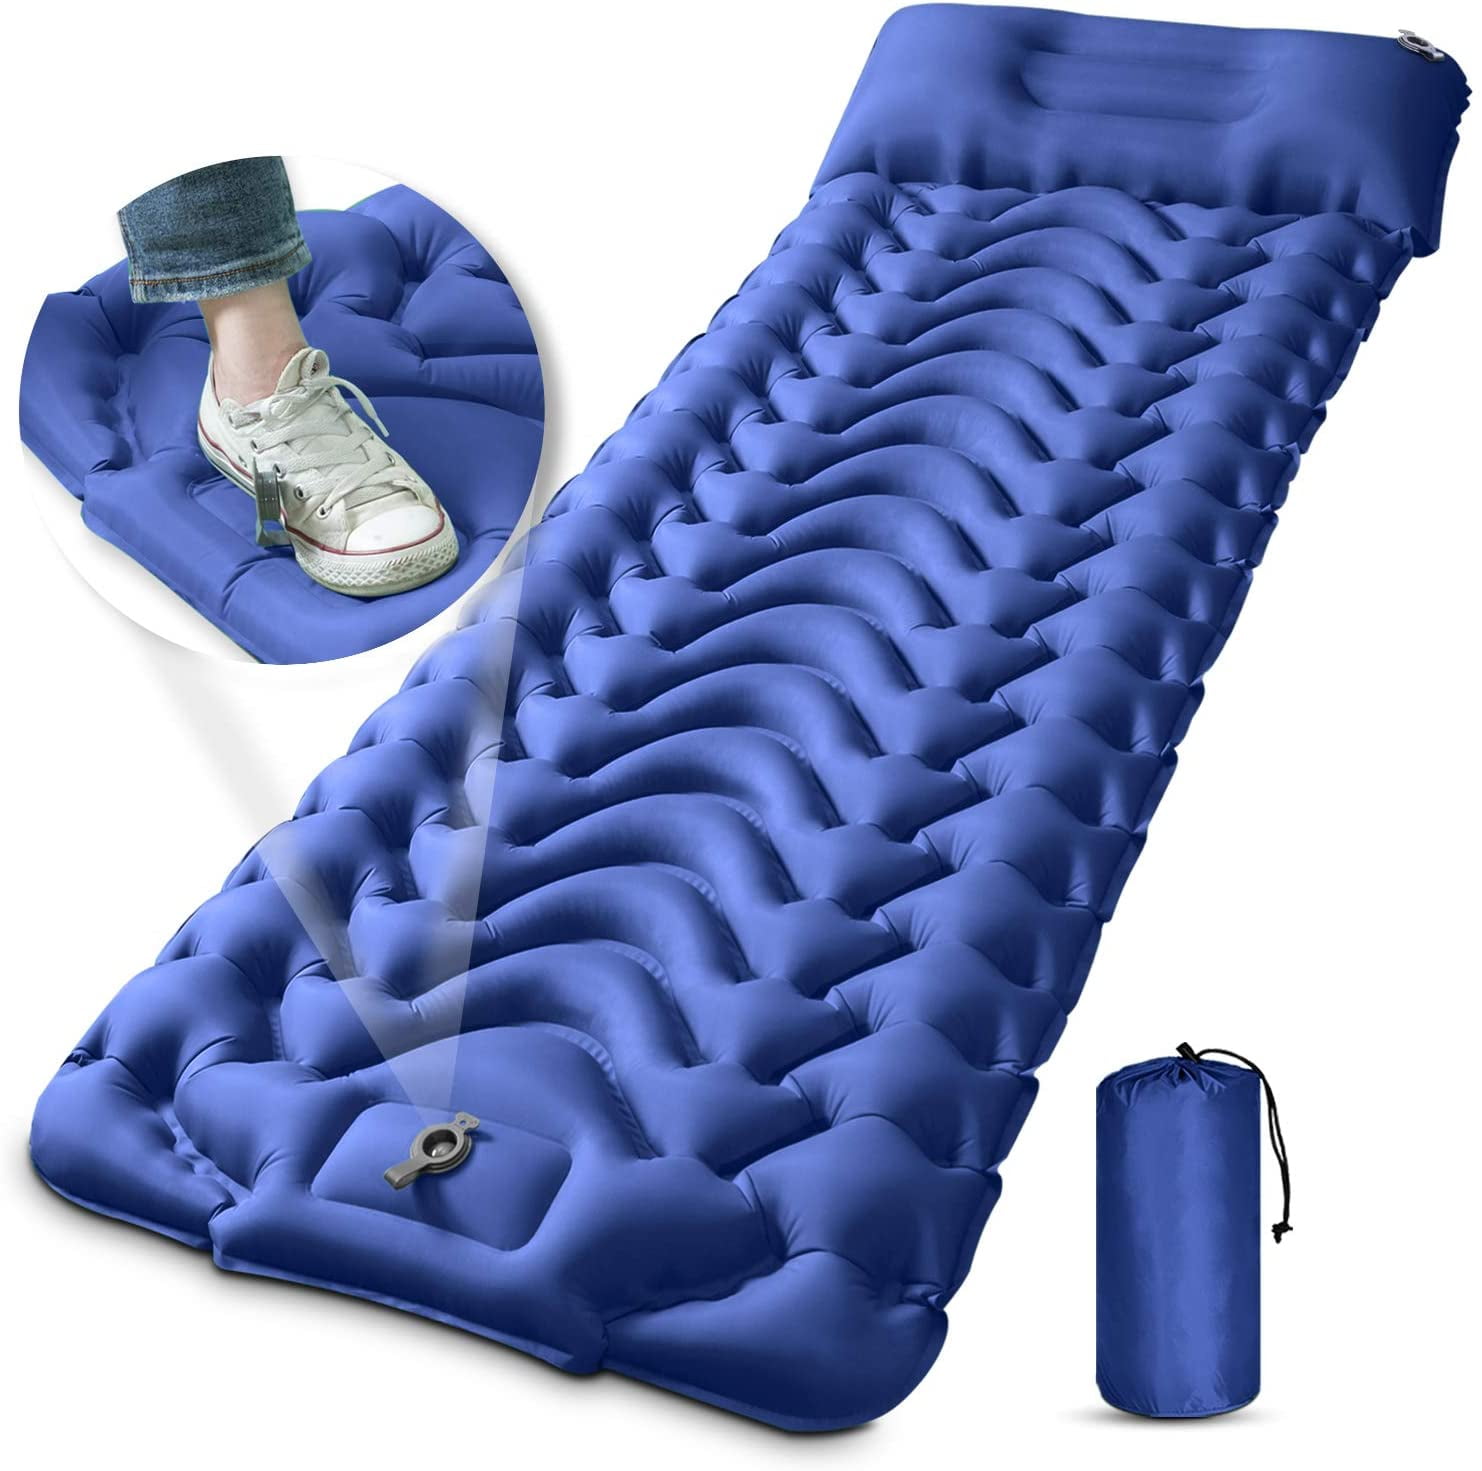 Inflatable Camping Sleeping Pad with Pillow Air Cells Design Lightweight Compact Mat for Hiking Backpacking Travel 